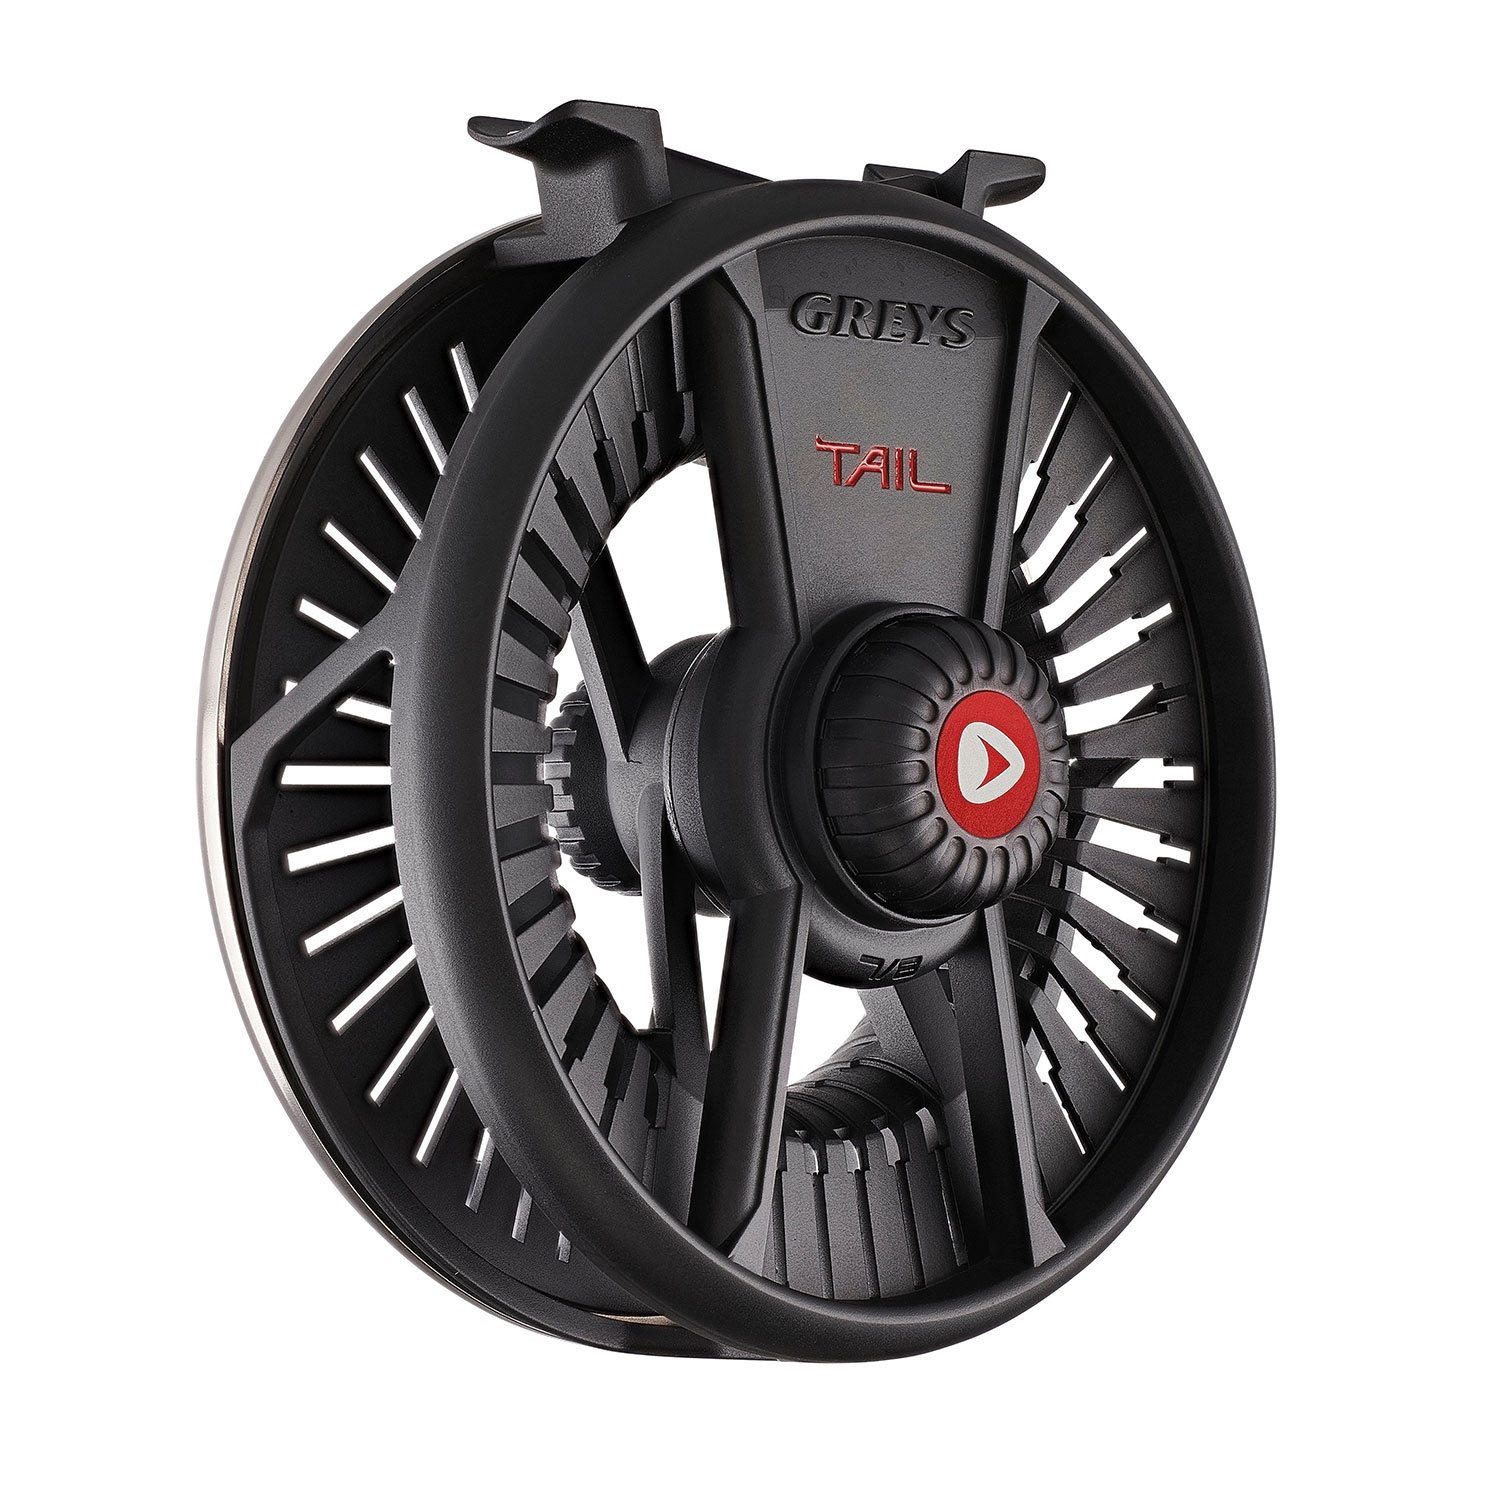 Greys Tail AW Flyreel